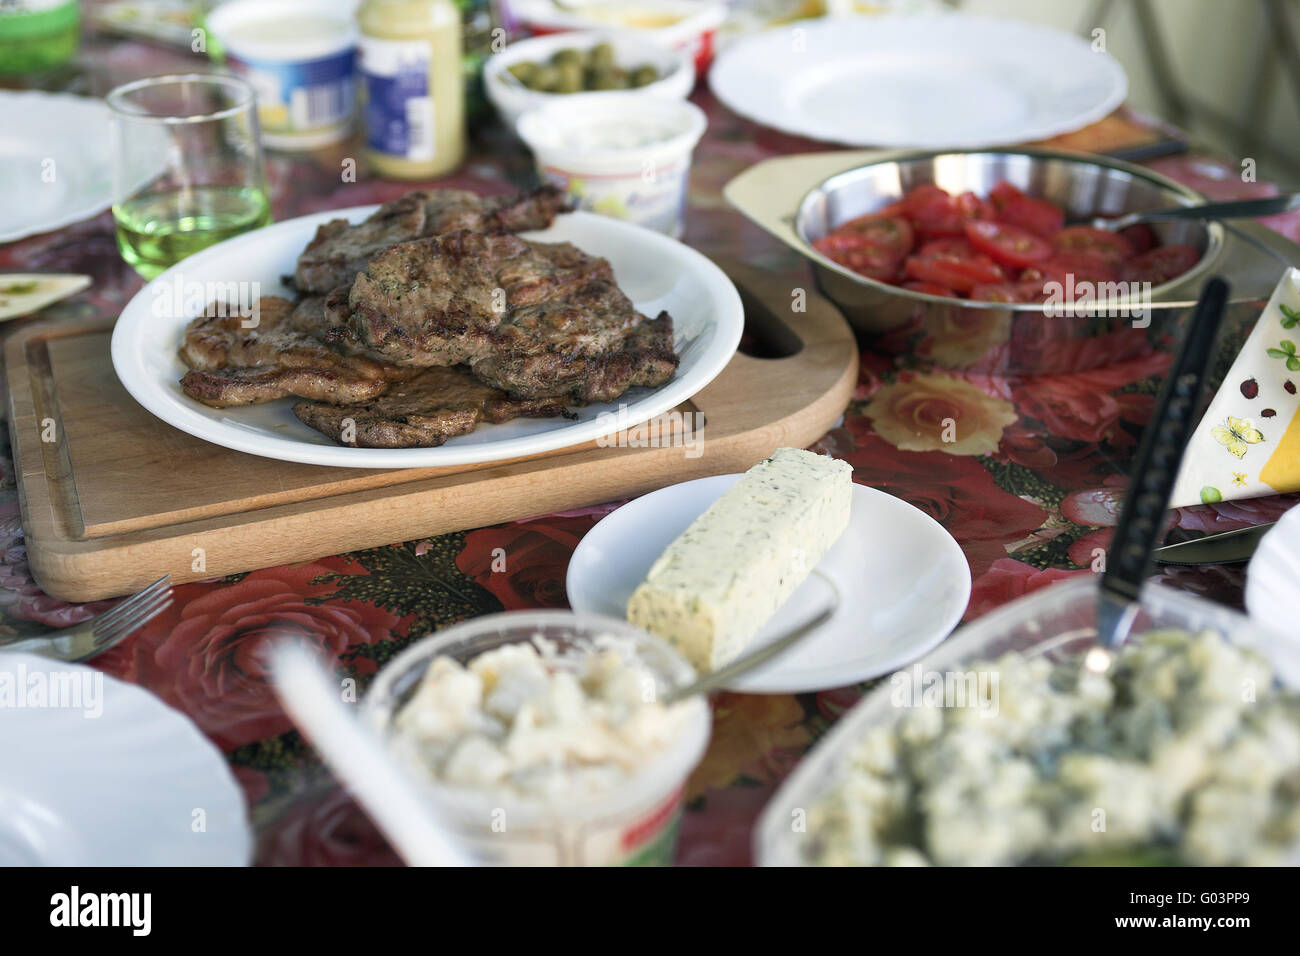 Conservative covered table with grilled meats and Stock Photo